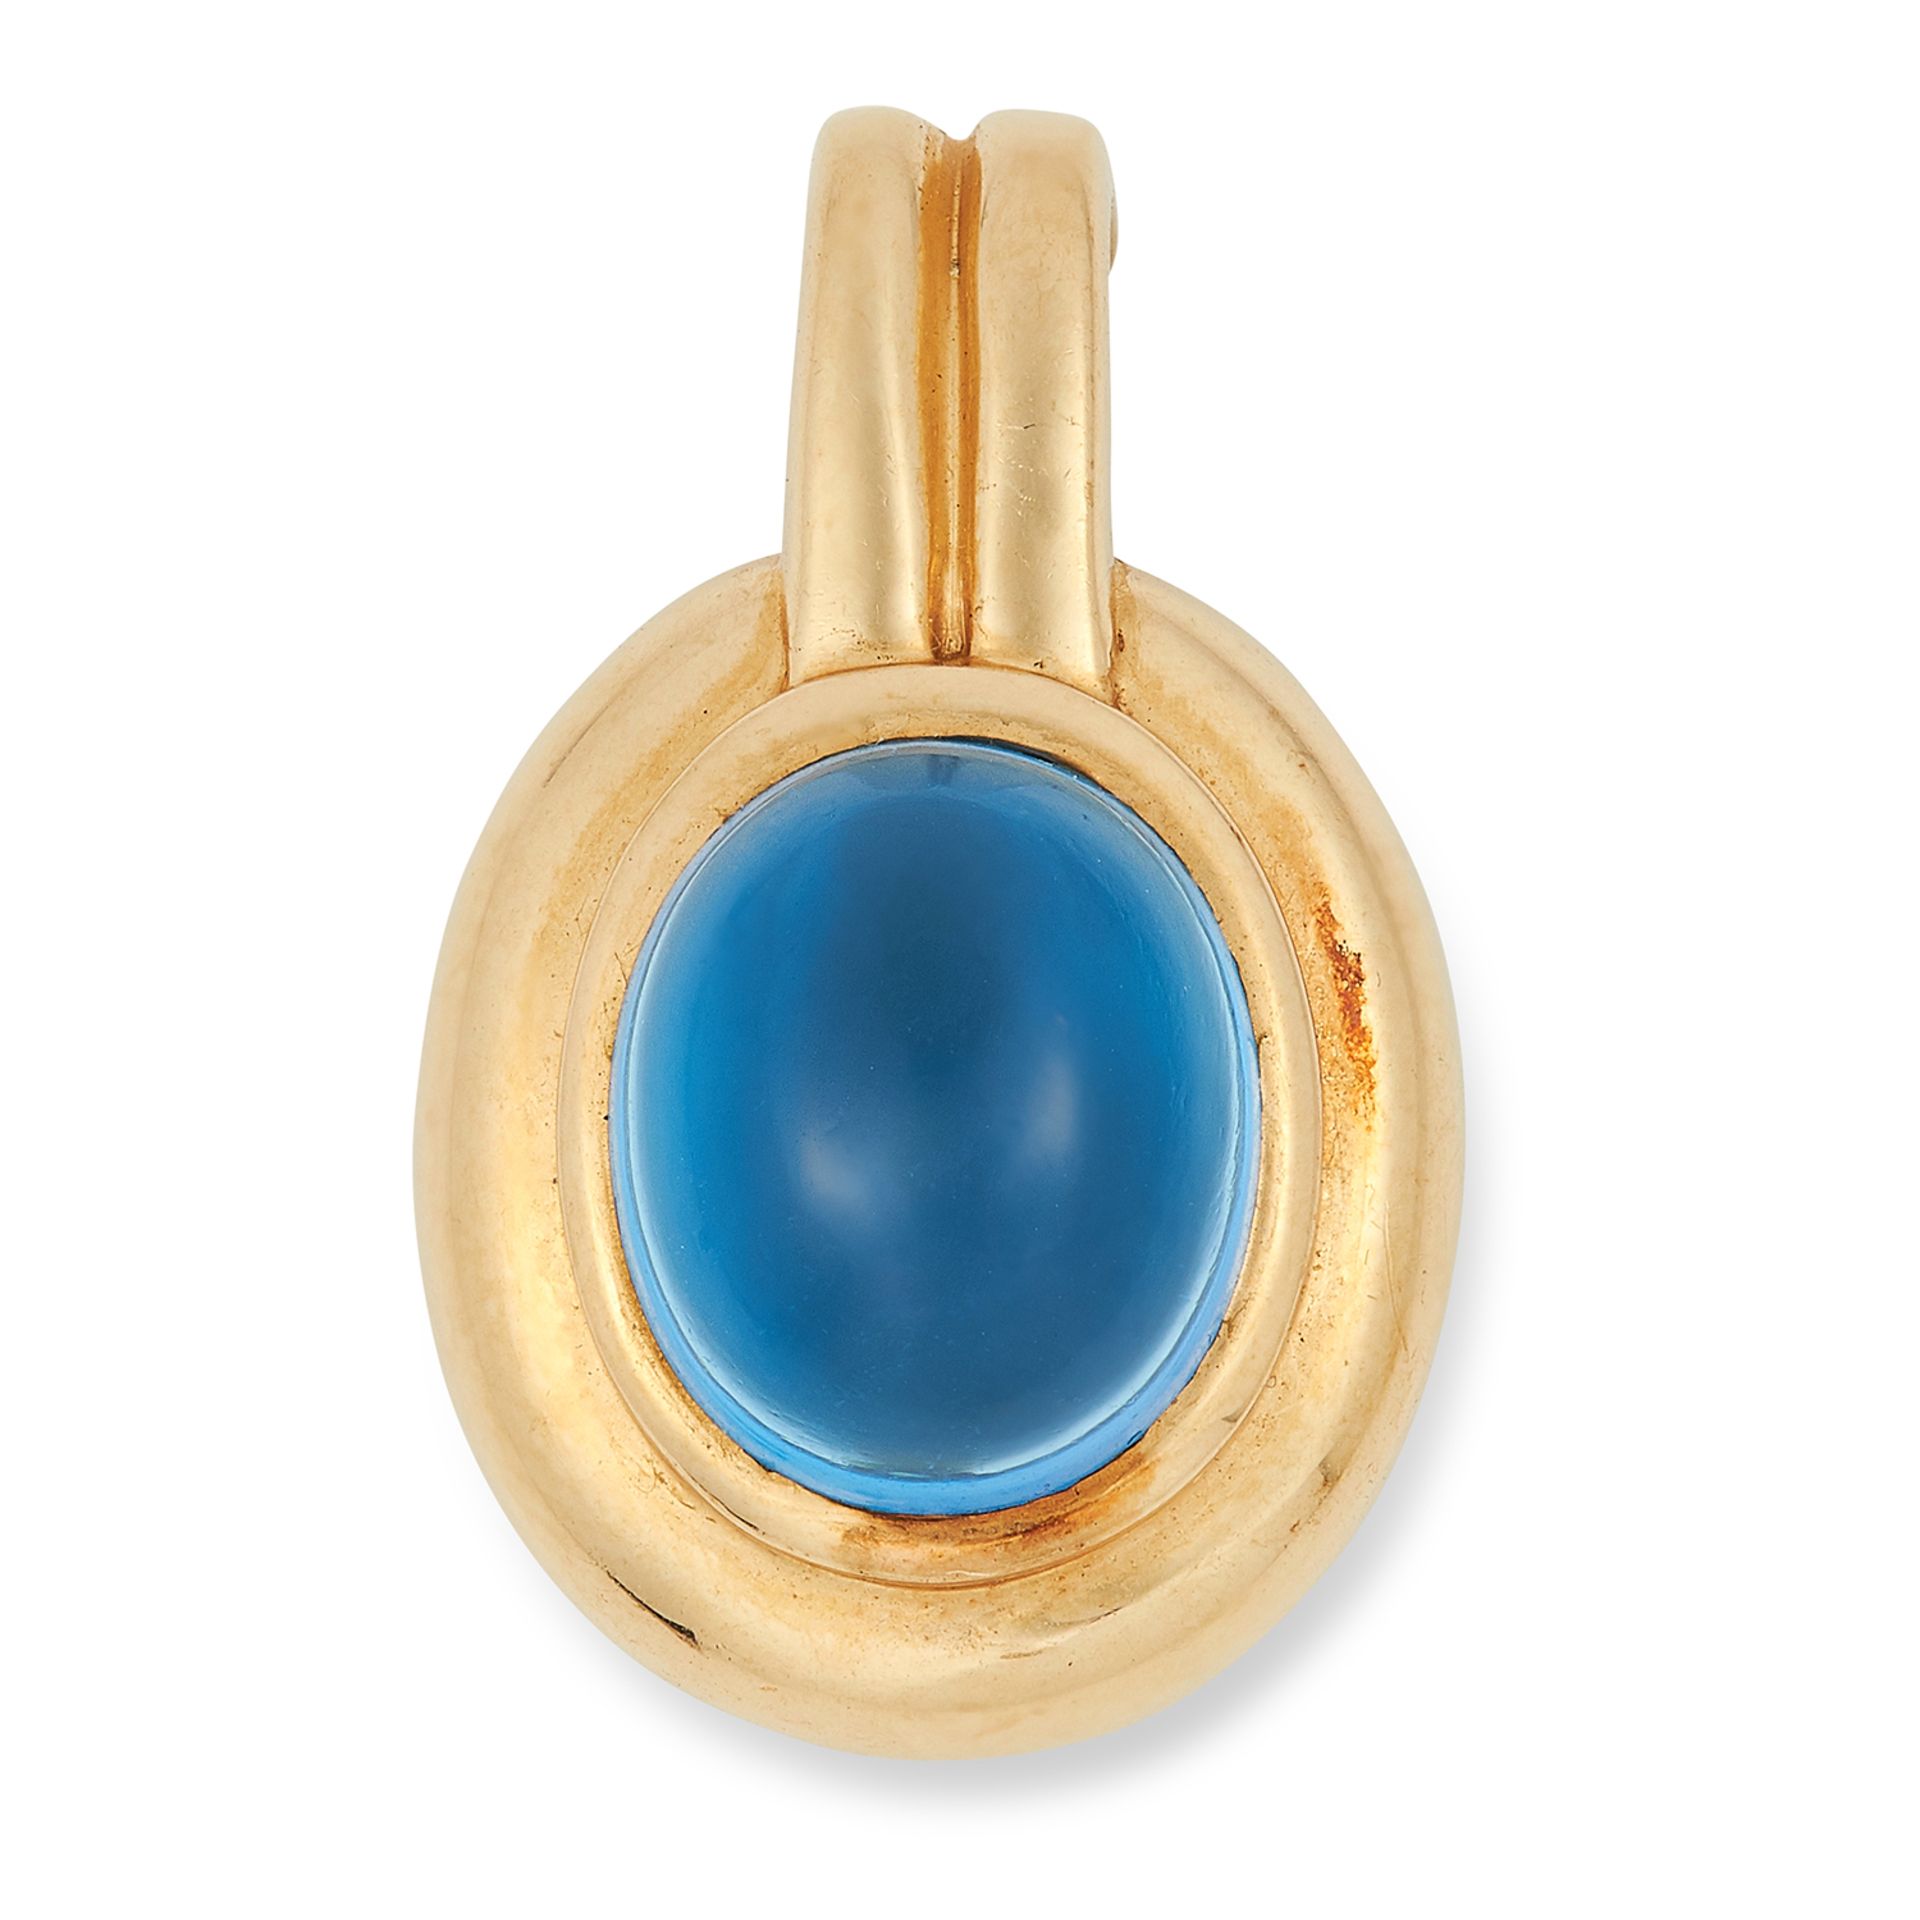 TOPAZ PENDANT set with a cabochon topaz in gold border, 2.5cm, 6.6g.